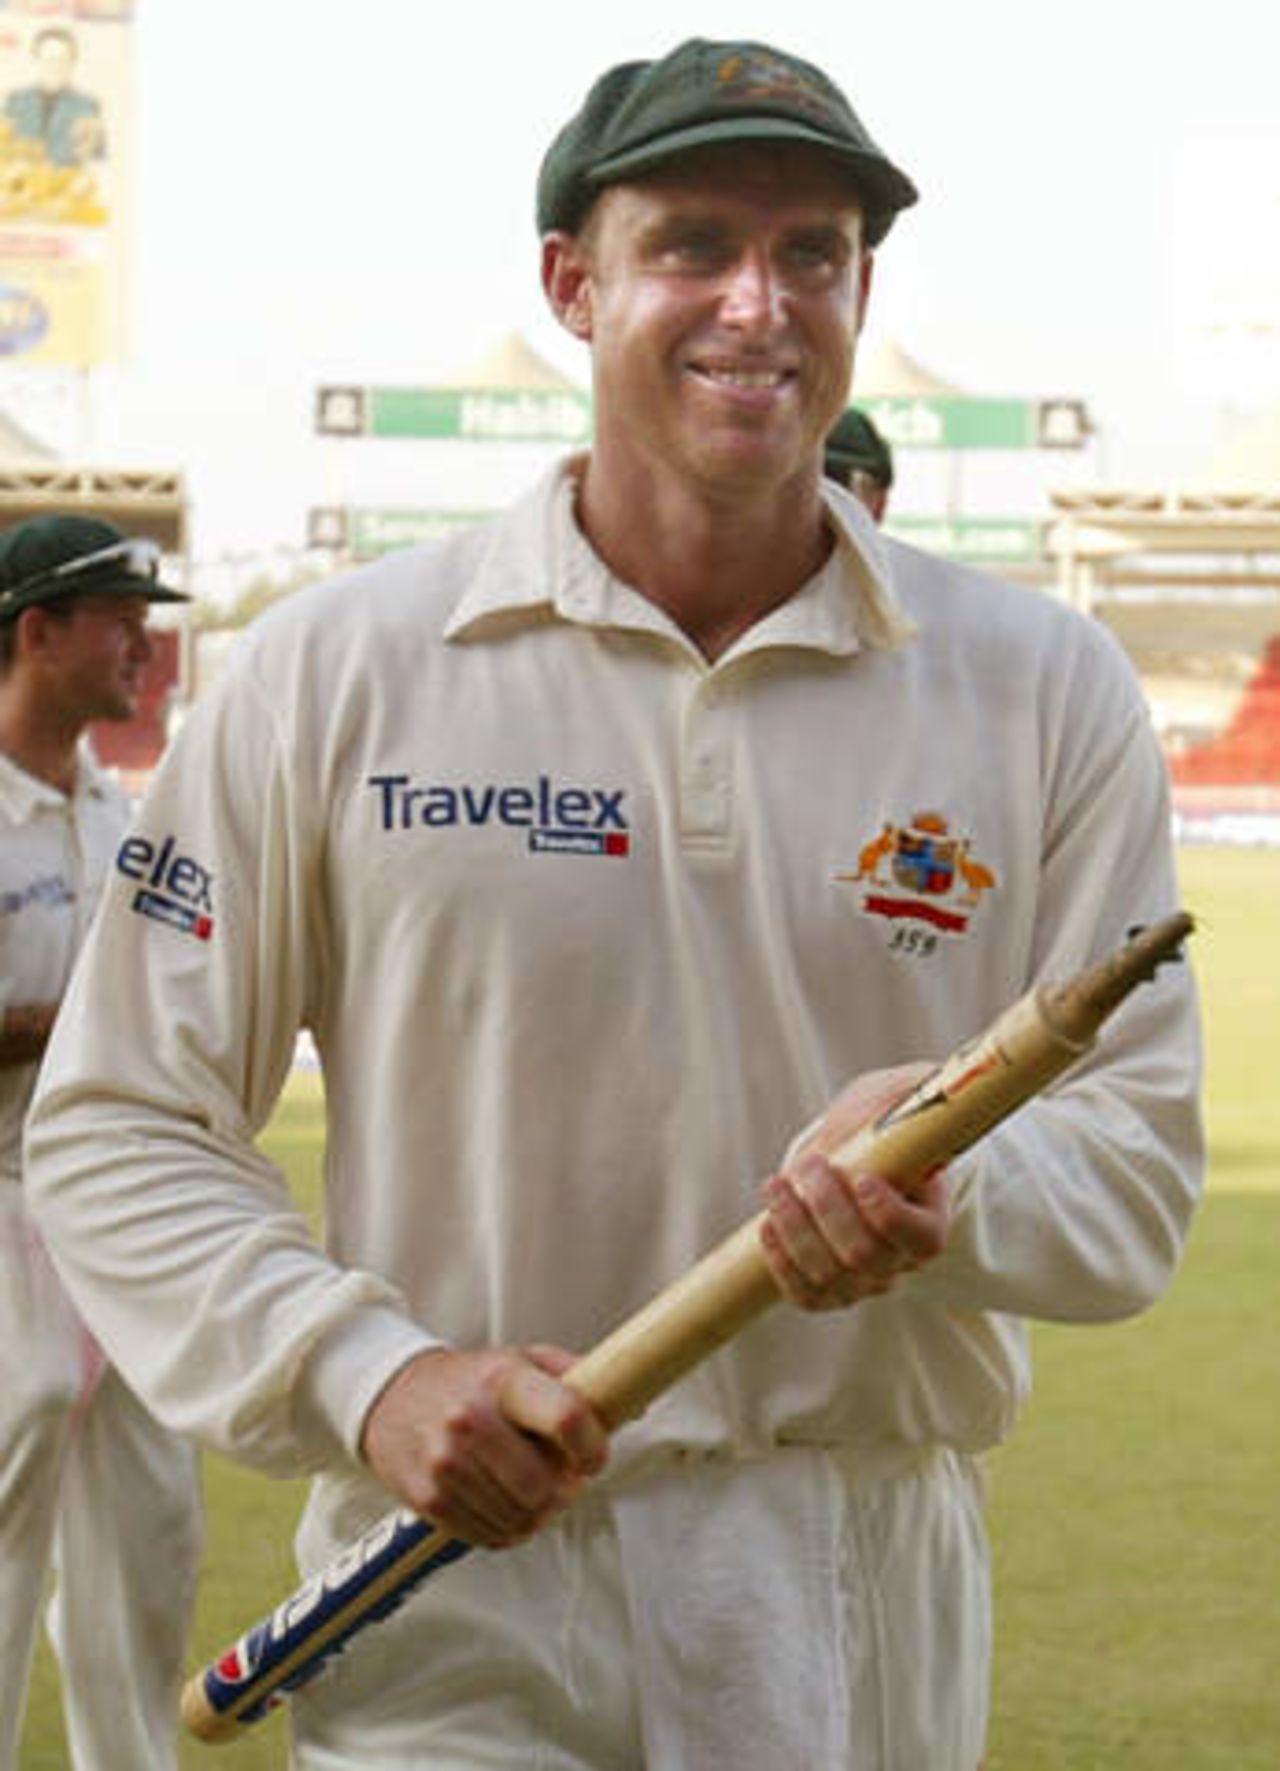 Australian high scoring batsman Matthew Hayden carries one of the stumps after defeating Pakistan in their second cricket test match in Sharjah's stadium October 12, 2002. Pakistan crumbled to defeat in less than two days of the second test against Australia on Saturday, adding just 53 to their first innings 59 and losing by an innings and 198 runs. Pakistan's match total of 112 was the fourth worst in test history.